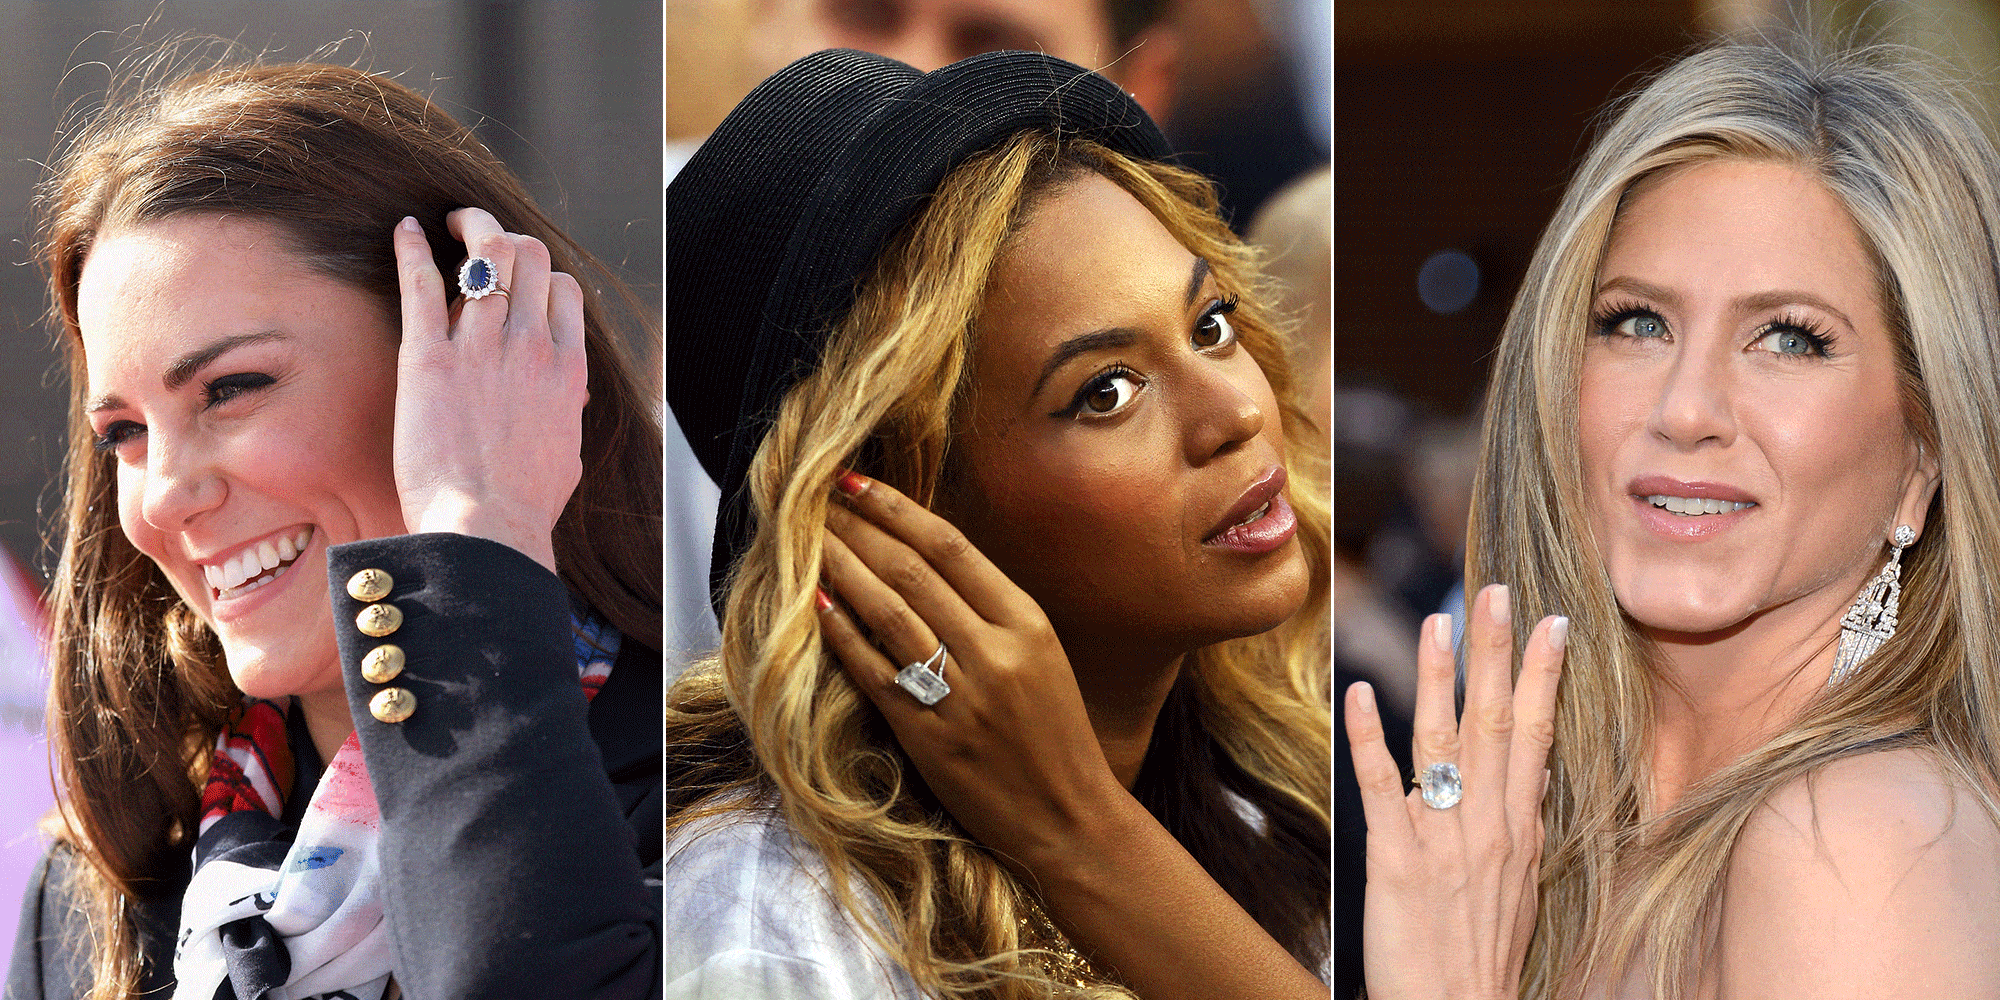 12 Celebrity Engagement Rings That Were Absolutely Bonkers Expensive And 8  That Were More Reasonably Priced